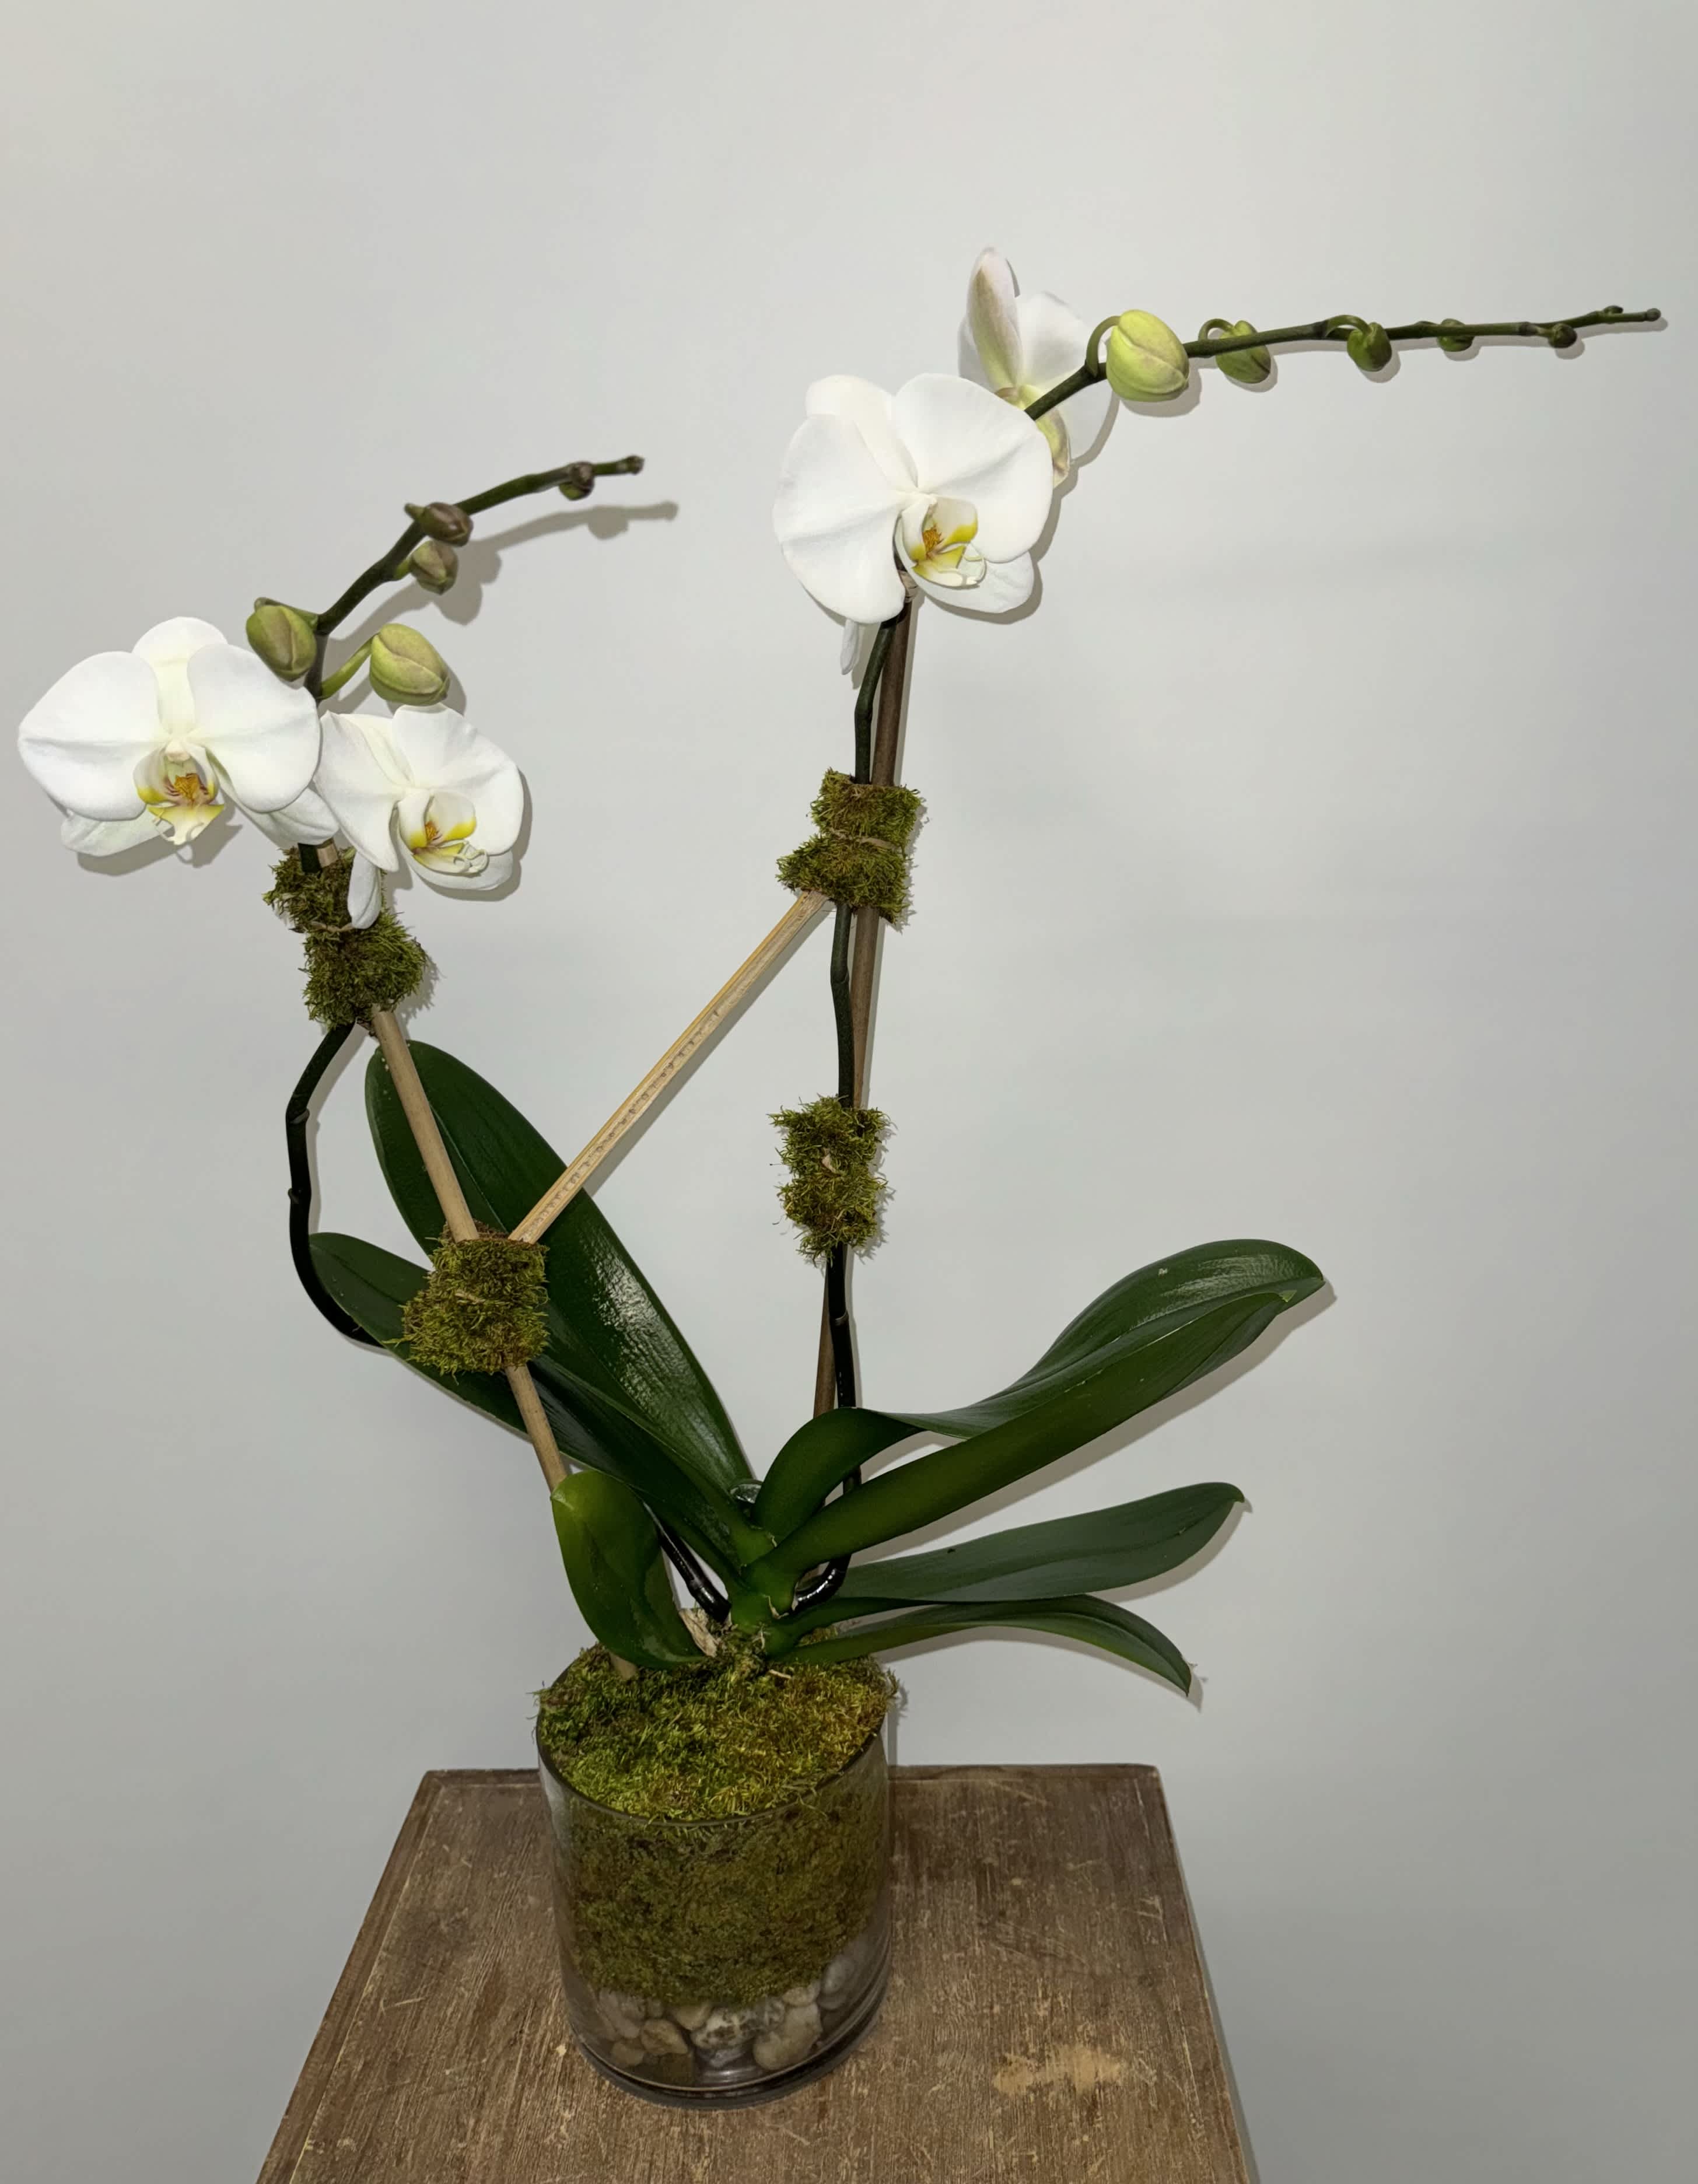 Phalaenopsis In Glass - Shown is double stem white Phalaenopsis orchid in a clear glass vase. A stunning, classic blooming plant. The Phalaenopsis orchid also known as the moth orchid is a beautiful gift for any and all occasions. They come in a variety of colors so please ask us what we have in stock.